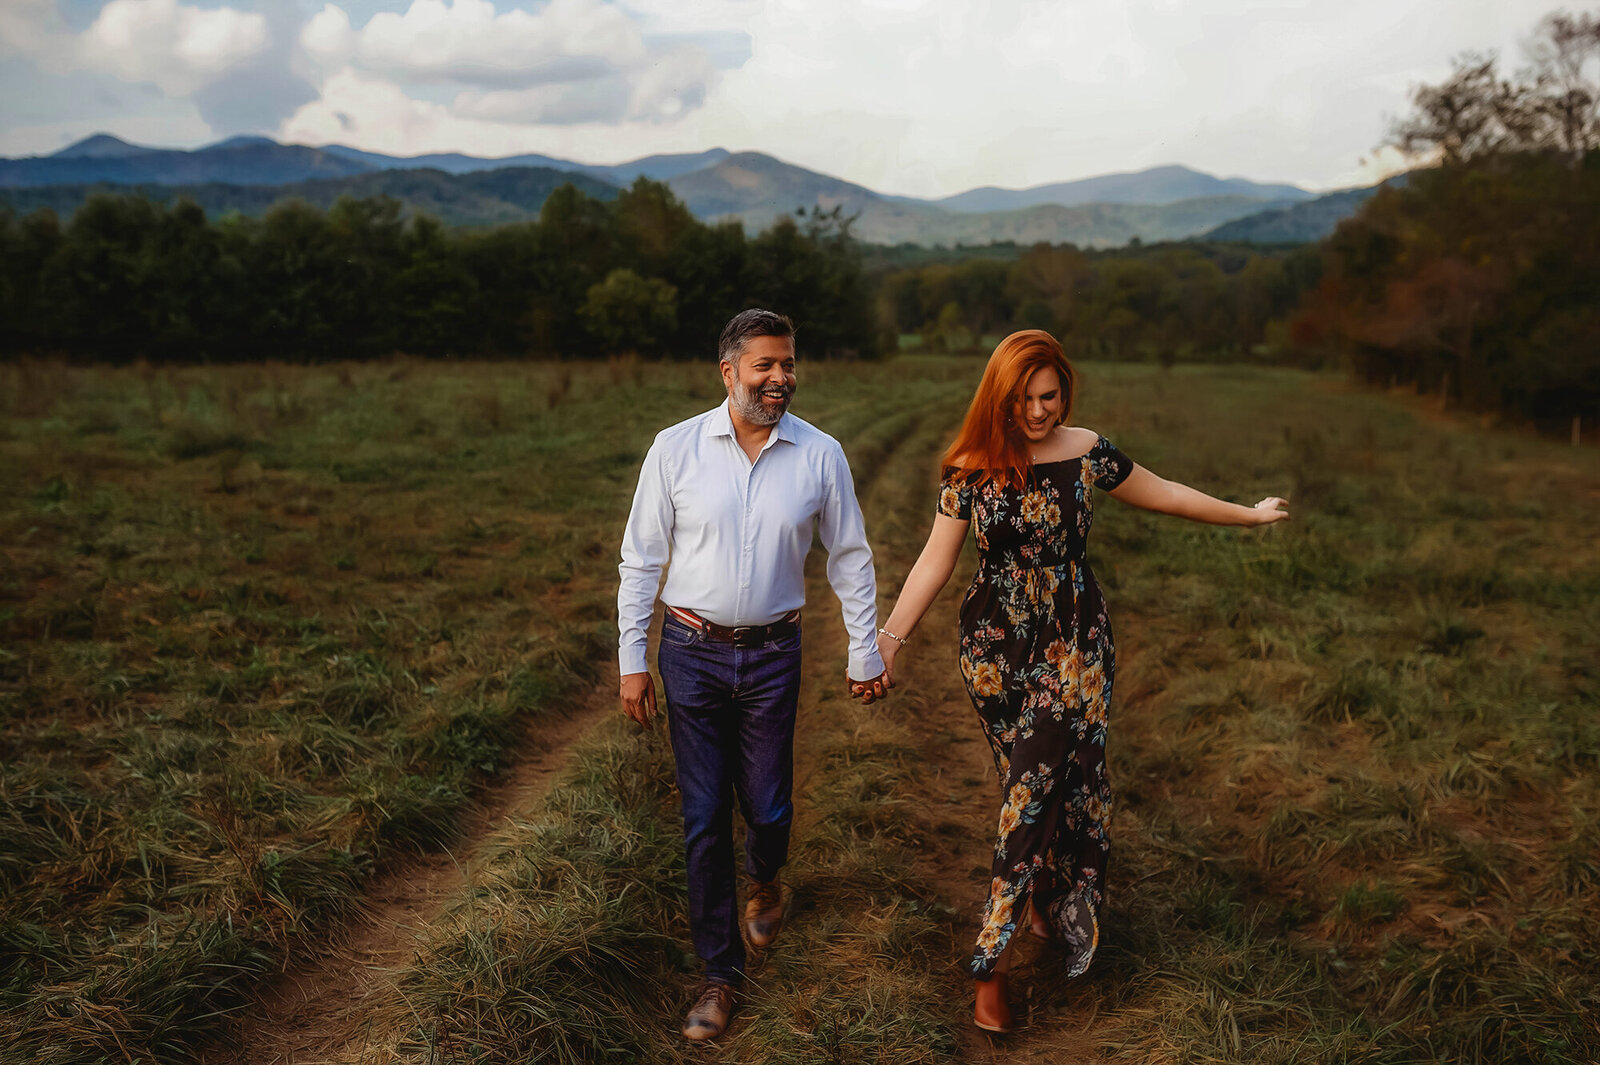 An engaged couple walks hand in hand during  Engagement Photos in a mountain field in Asheville, NC.